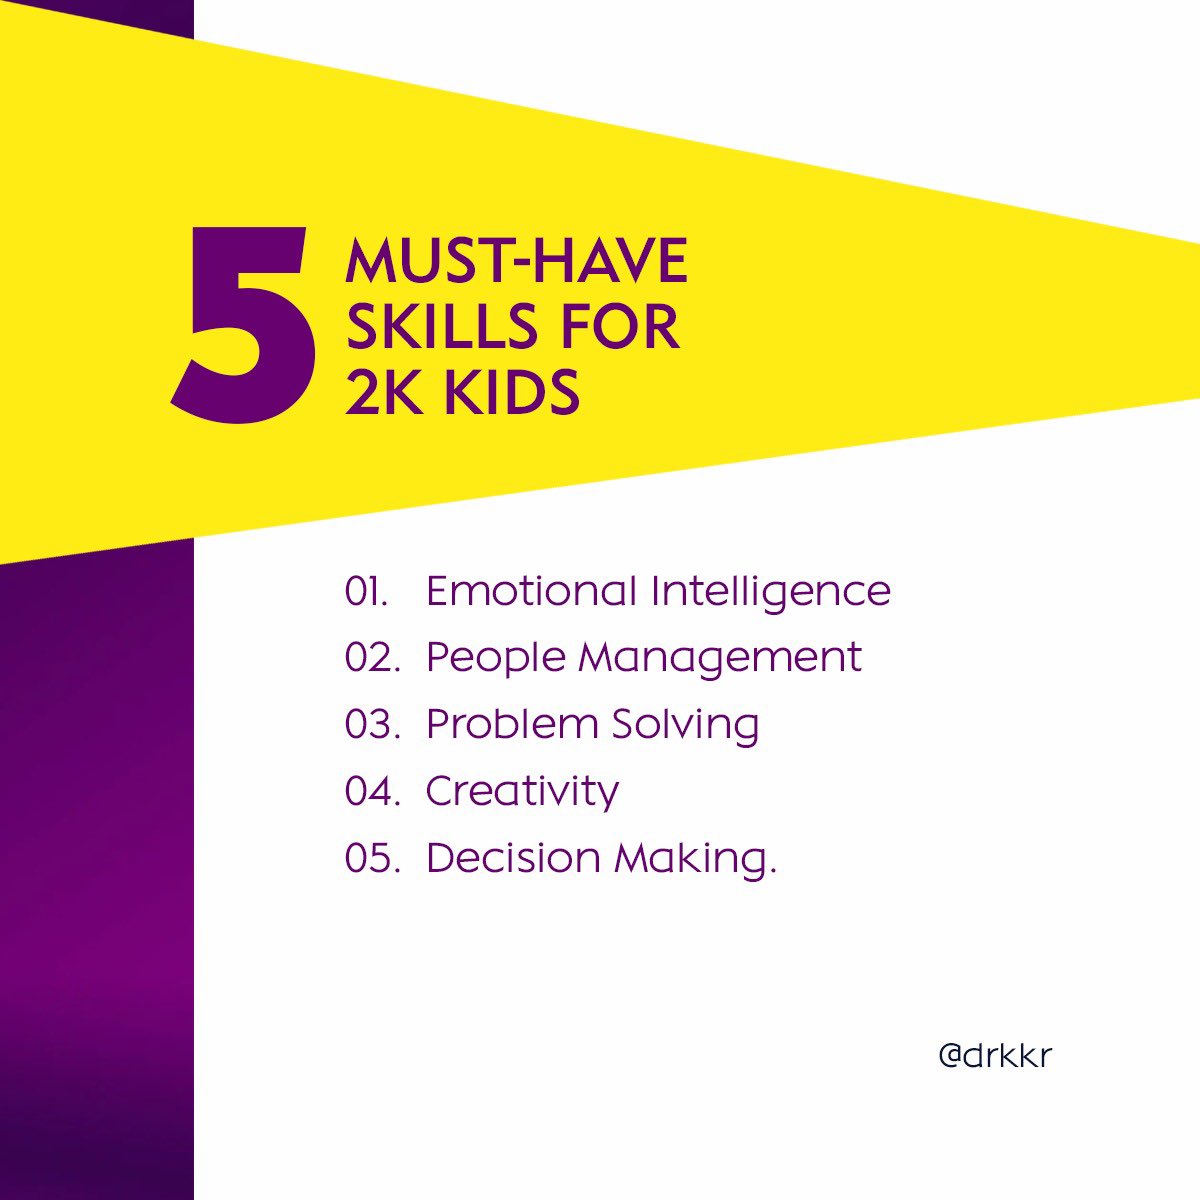 Exciting Discovery Alert! After years of dedicated research into individual and team performance, I am thrilled to unveil my latest findings: the 5 essential skills for the 2K generation! Emotional Intelligence: Master the art of understanding and managing emotions to foster…